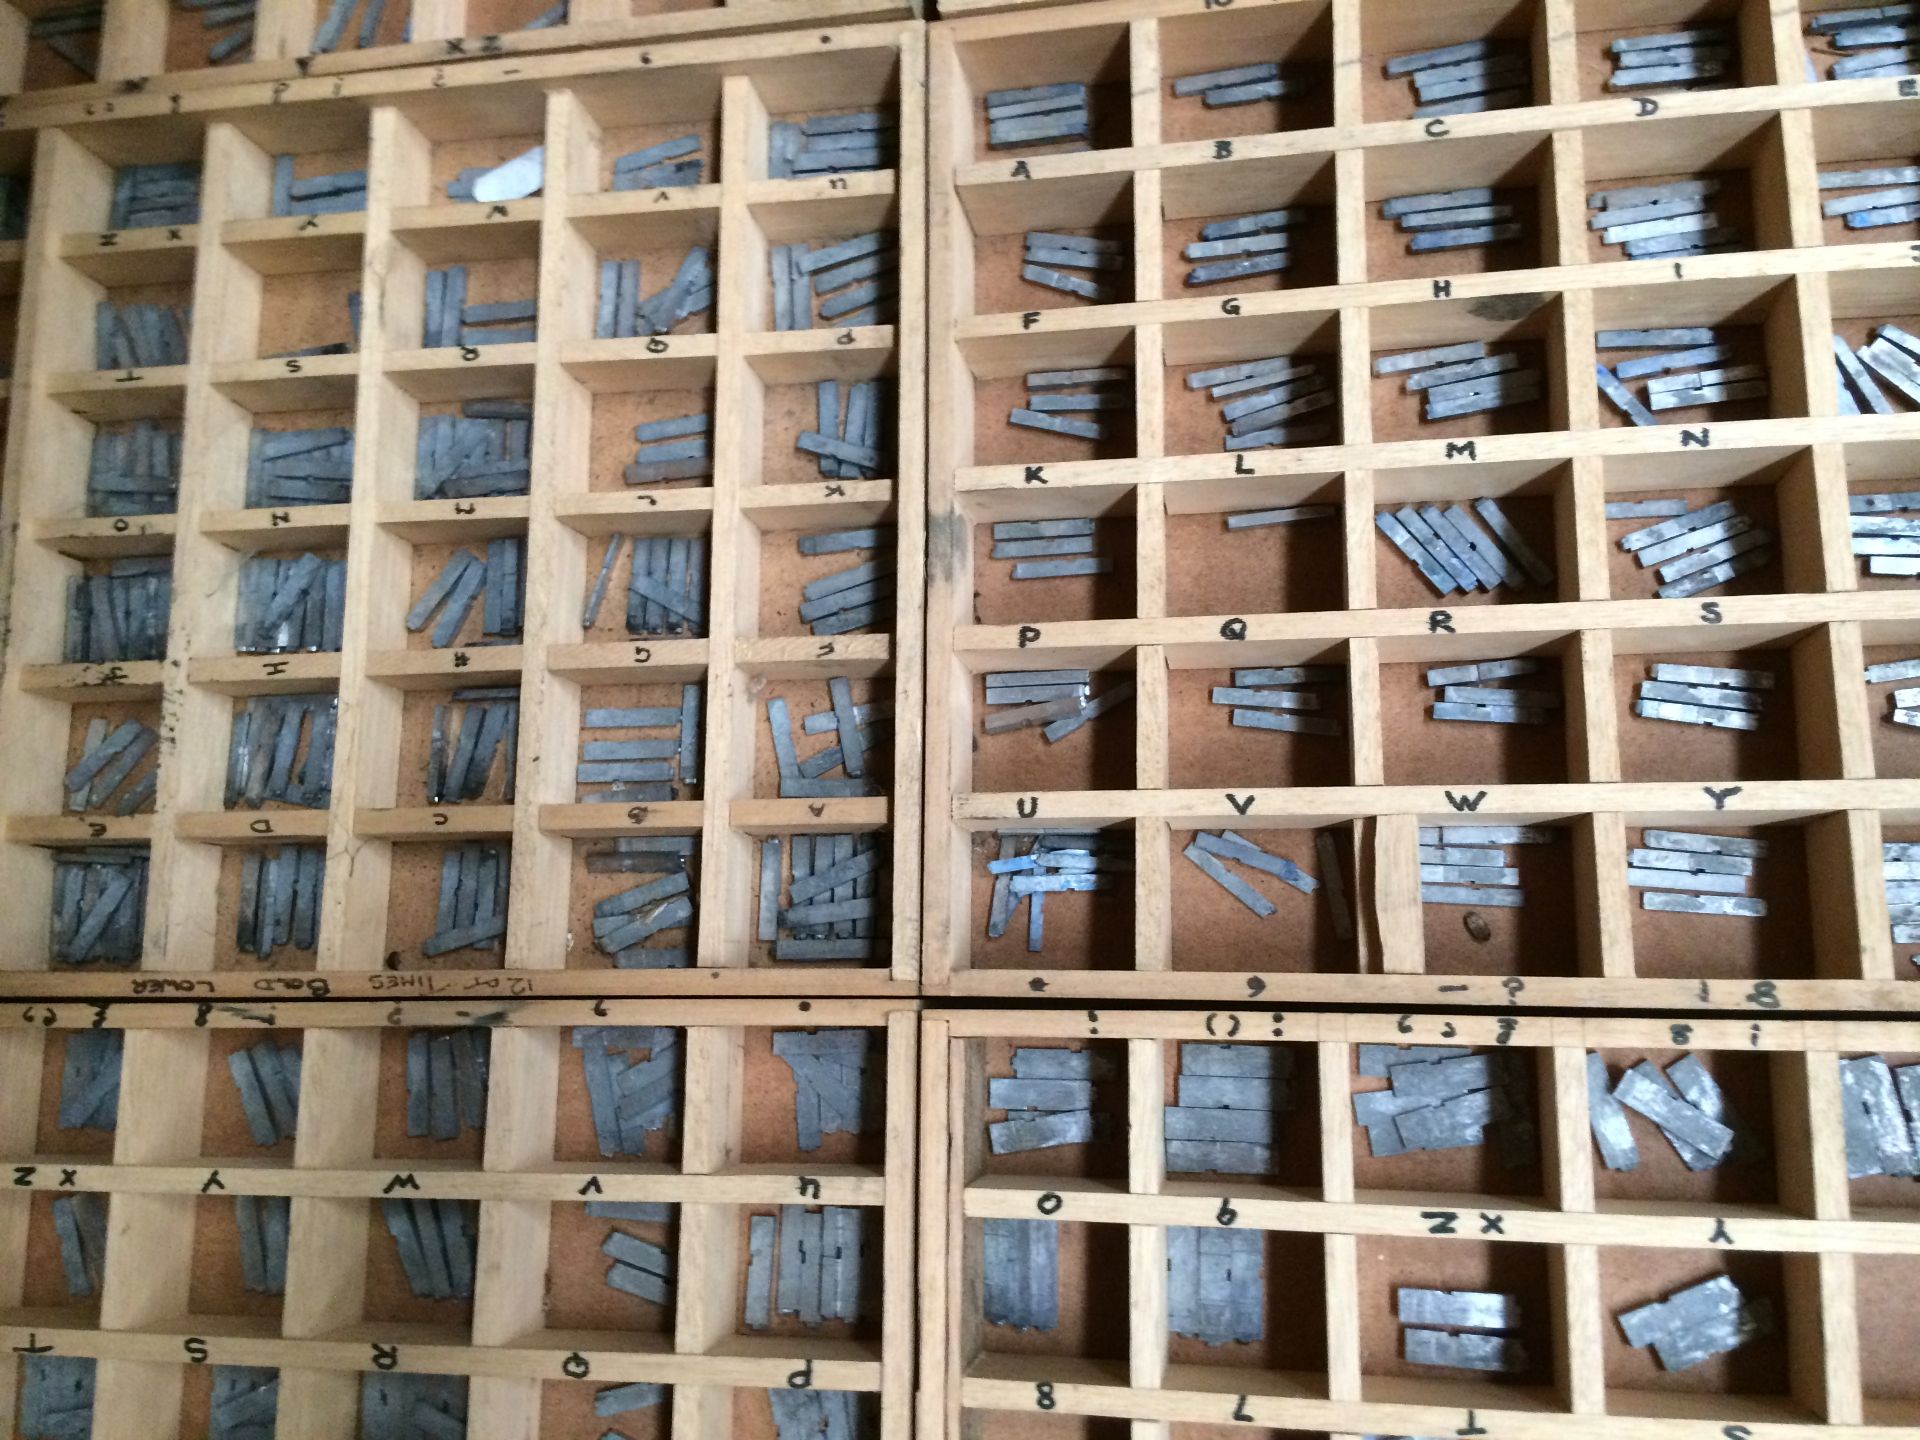 Contents to 17 trays - large quantity of metal type face for Adana printing machine - Image 6 of 6